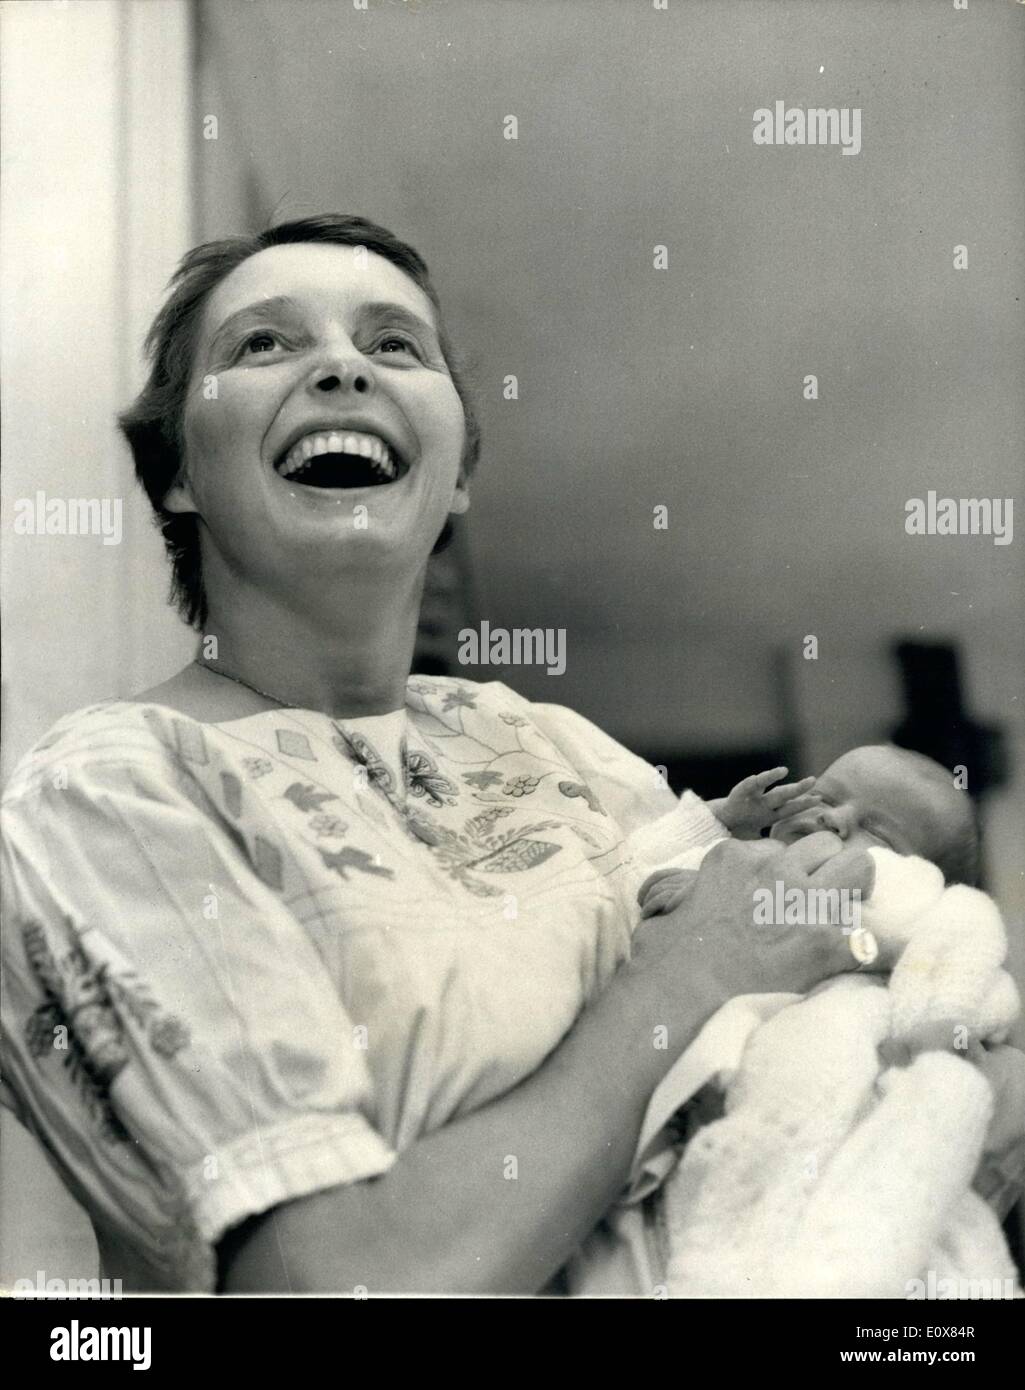 Aug. 08, 1965 - Patricia Neal Leaves Hospital with Her Newly Born Daughter.: Patrica Neal the American actress who lives in Britain, with her husband who is author Mr. Roald Dahl, and her three other children, left the Nuffield Maternity home , Oxford this afternoon with the latest daughter to the family born last week. Pat Neal suffered a series of near-fatal strokes last February while living in America. Photo shows Pat Neal seen  the Maternity home baby daughter Lucy. Stock Photo